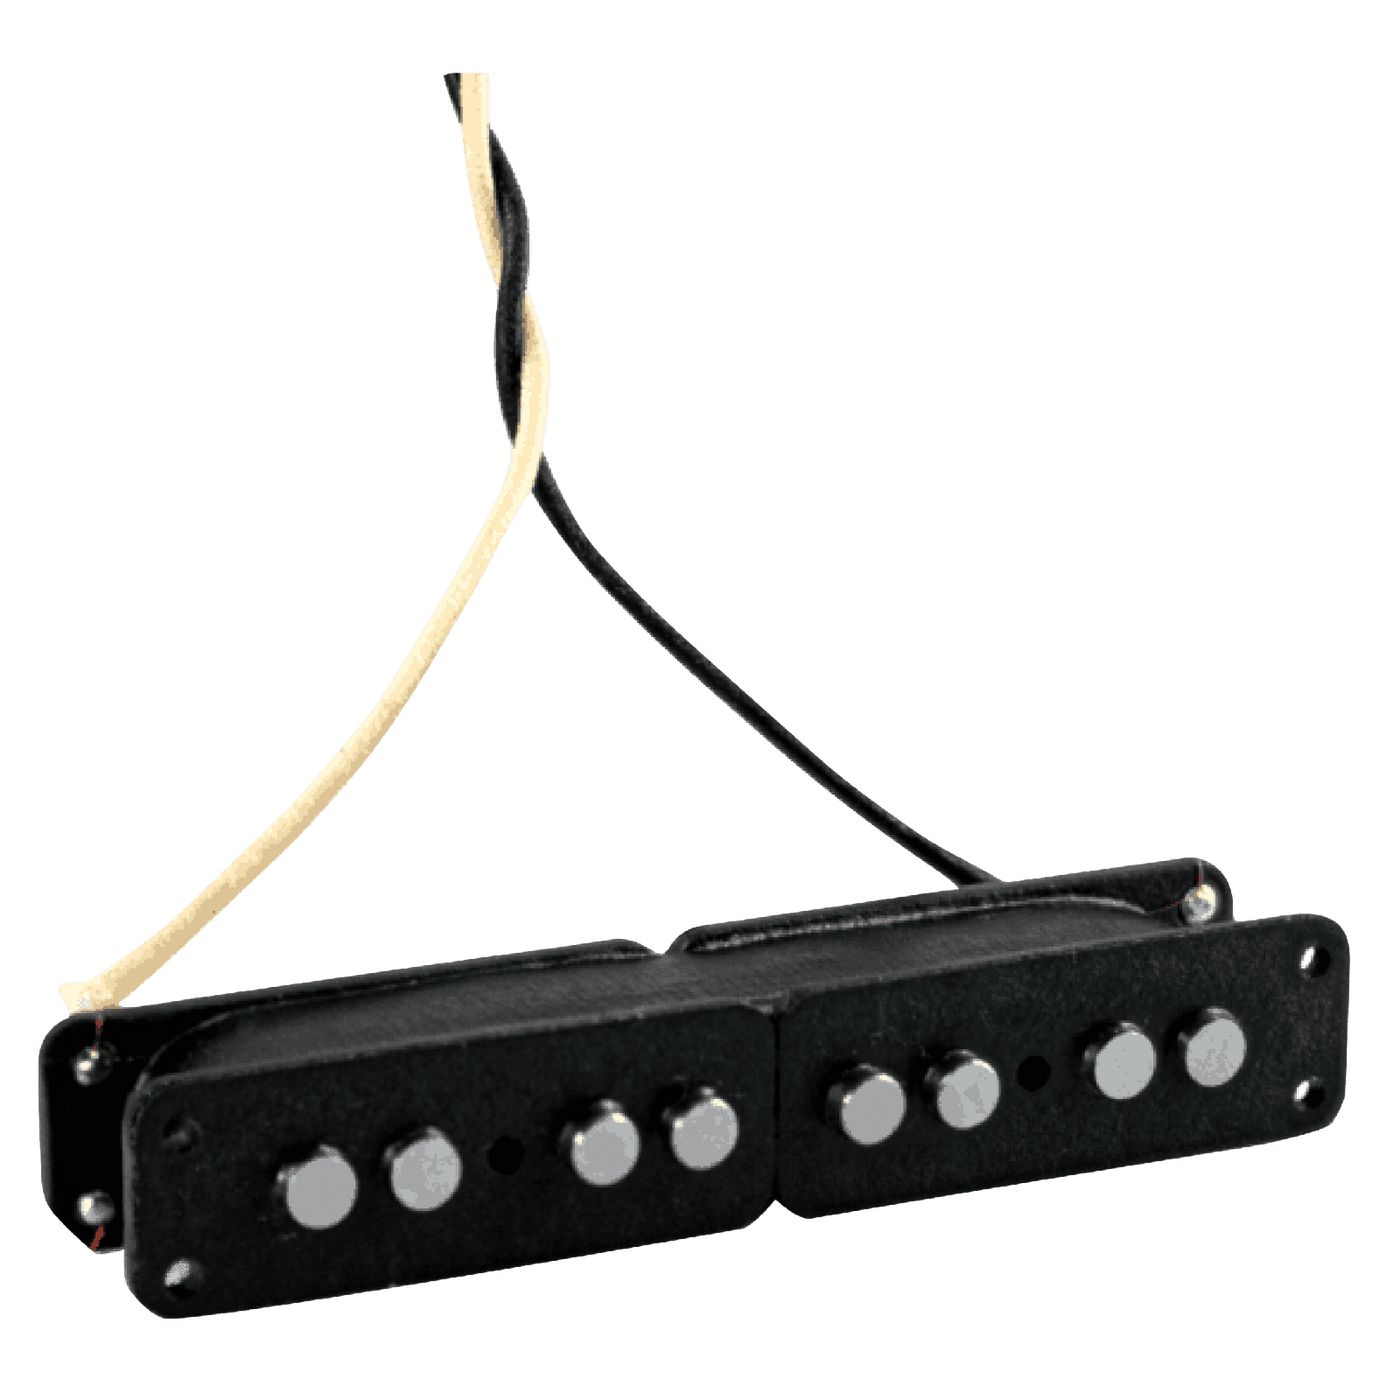 Lindy Fralin Split Jazz 4 White Cover - DescriptionLindy Fralin Split Jazz Bass Pickups offer a loud, clear and even response to four string bass players with no hum. This bass pickup allows you to get all of the Jazz-Bass vibe that you love, minus the hu